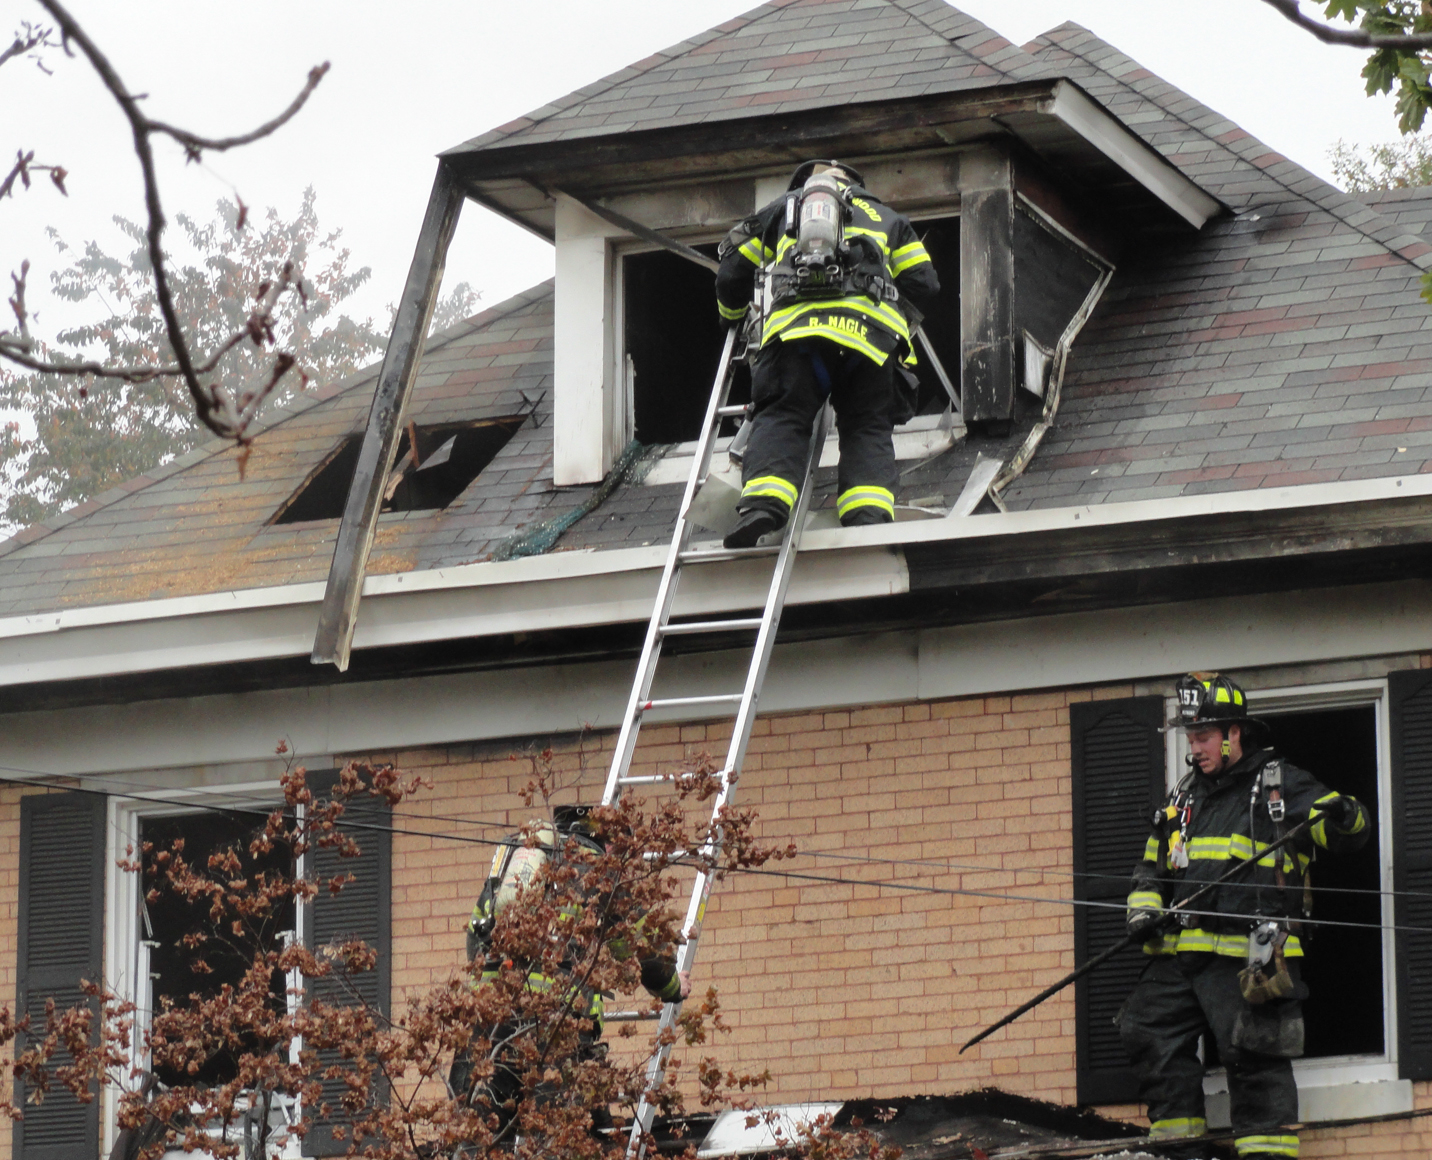 The attic bedroom in the Crestmont Terrace home was badly damaged by the fire. Credit: Matt Skoufalos.